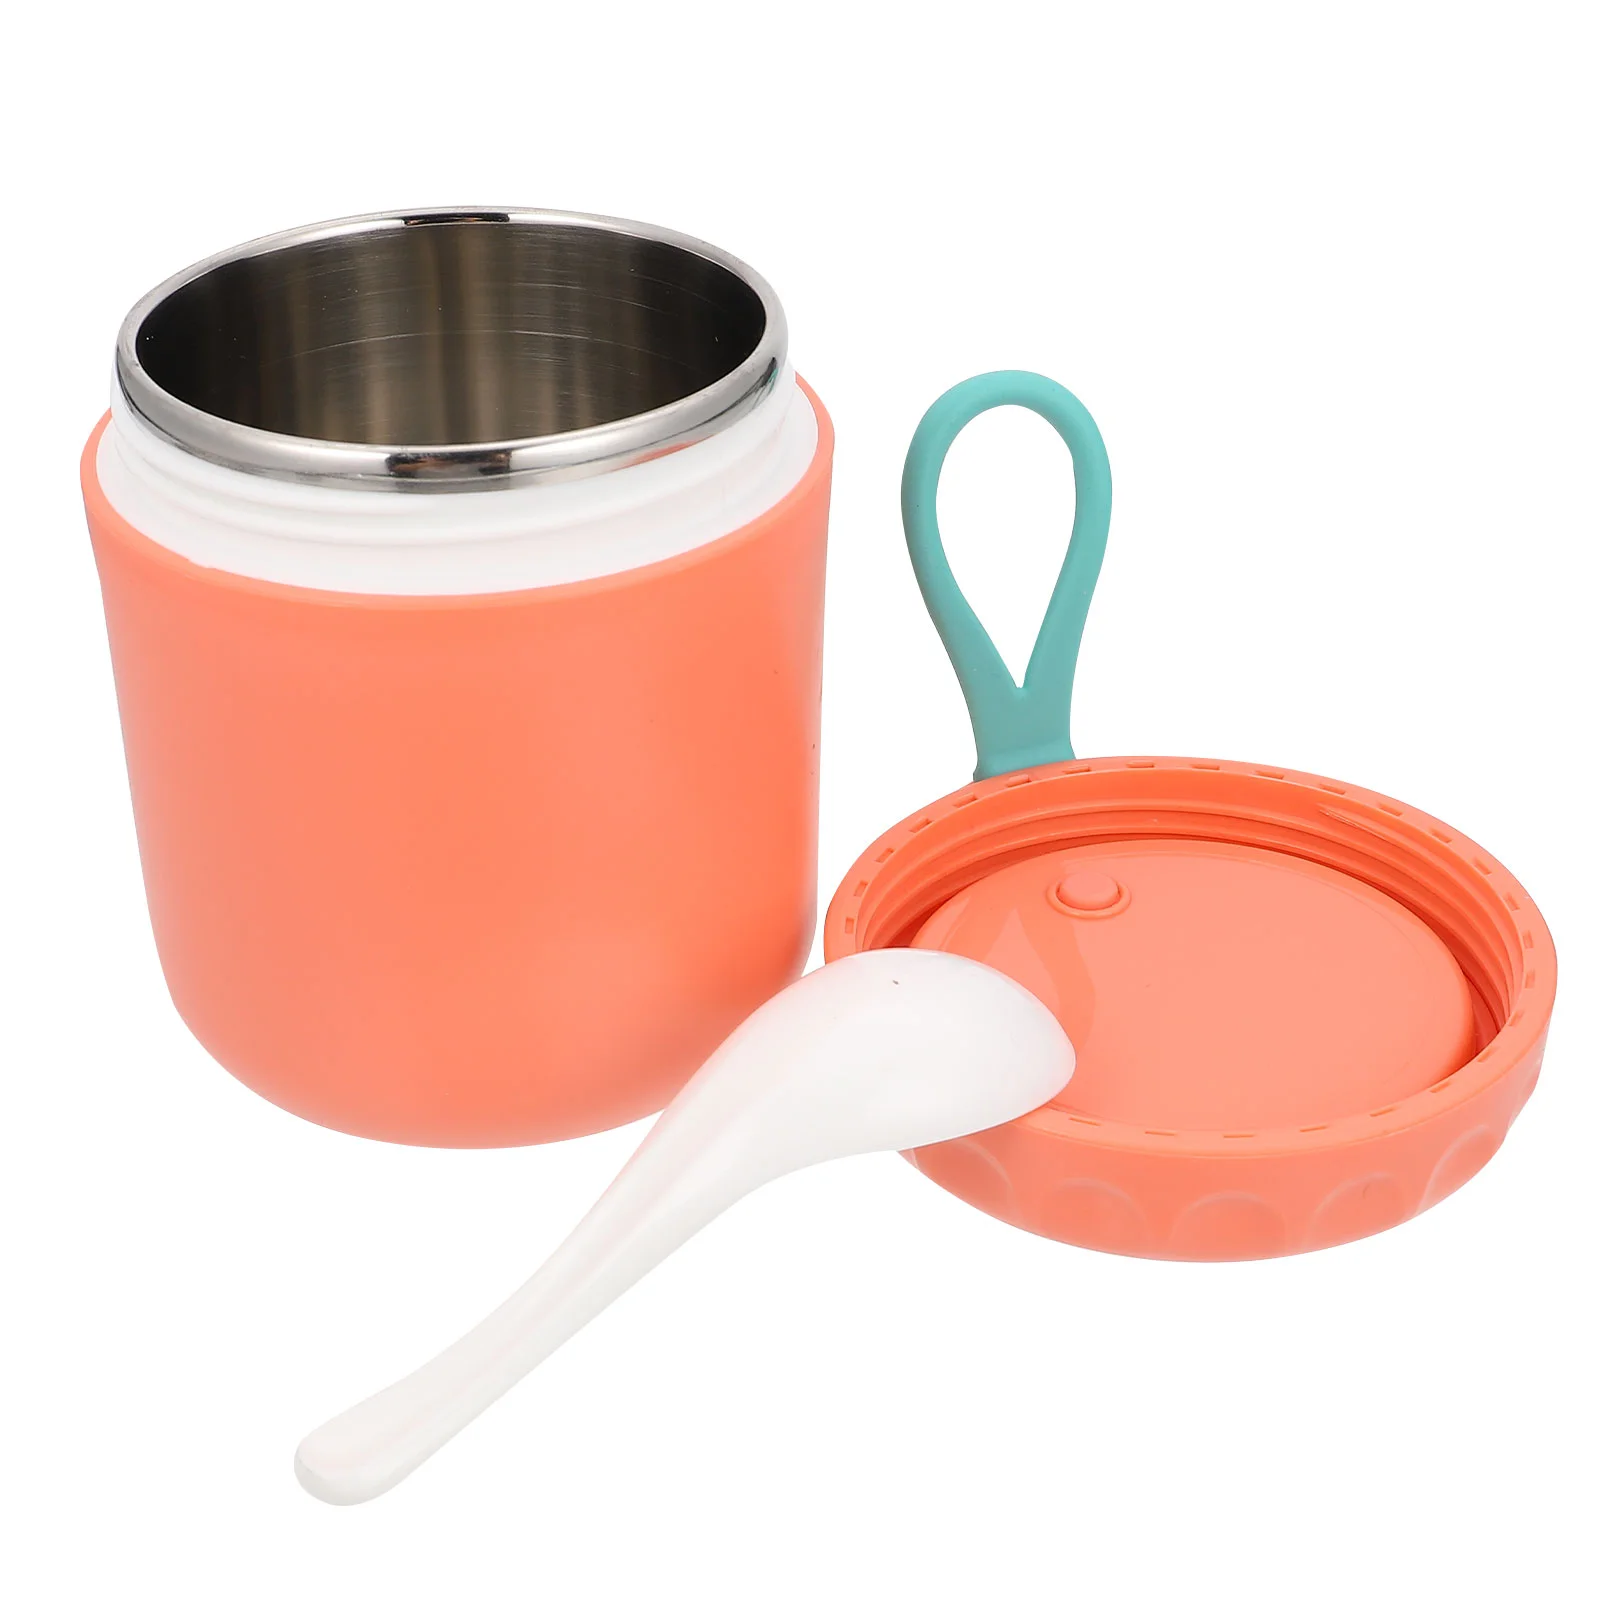 

Soup Container Insulated Lunch Containers Box Mug Hot Steel Jar Vacuum Stainless Leakproof Thermal Thermo Bowl Wide Mouth